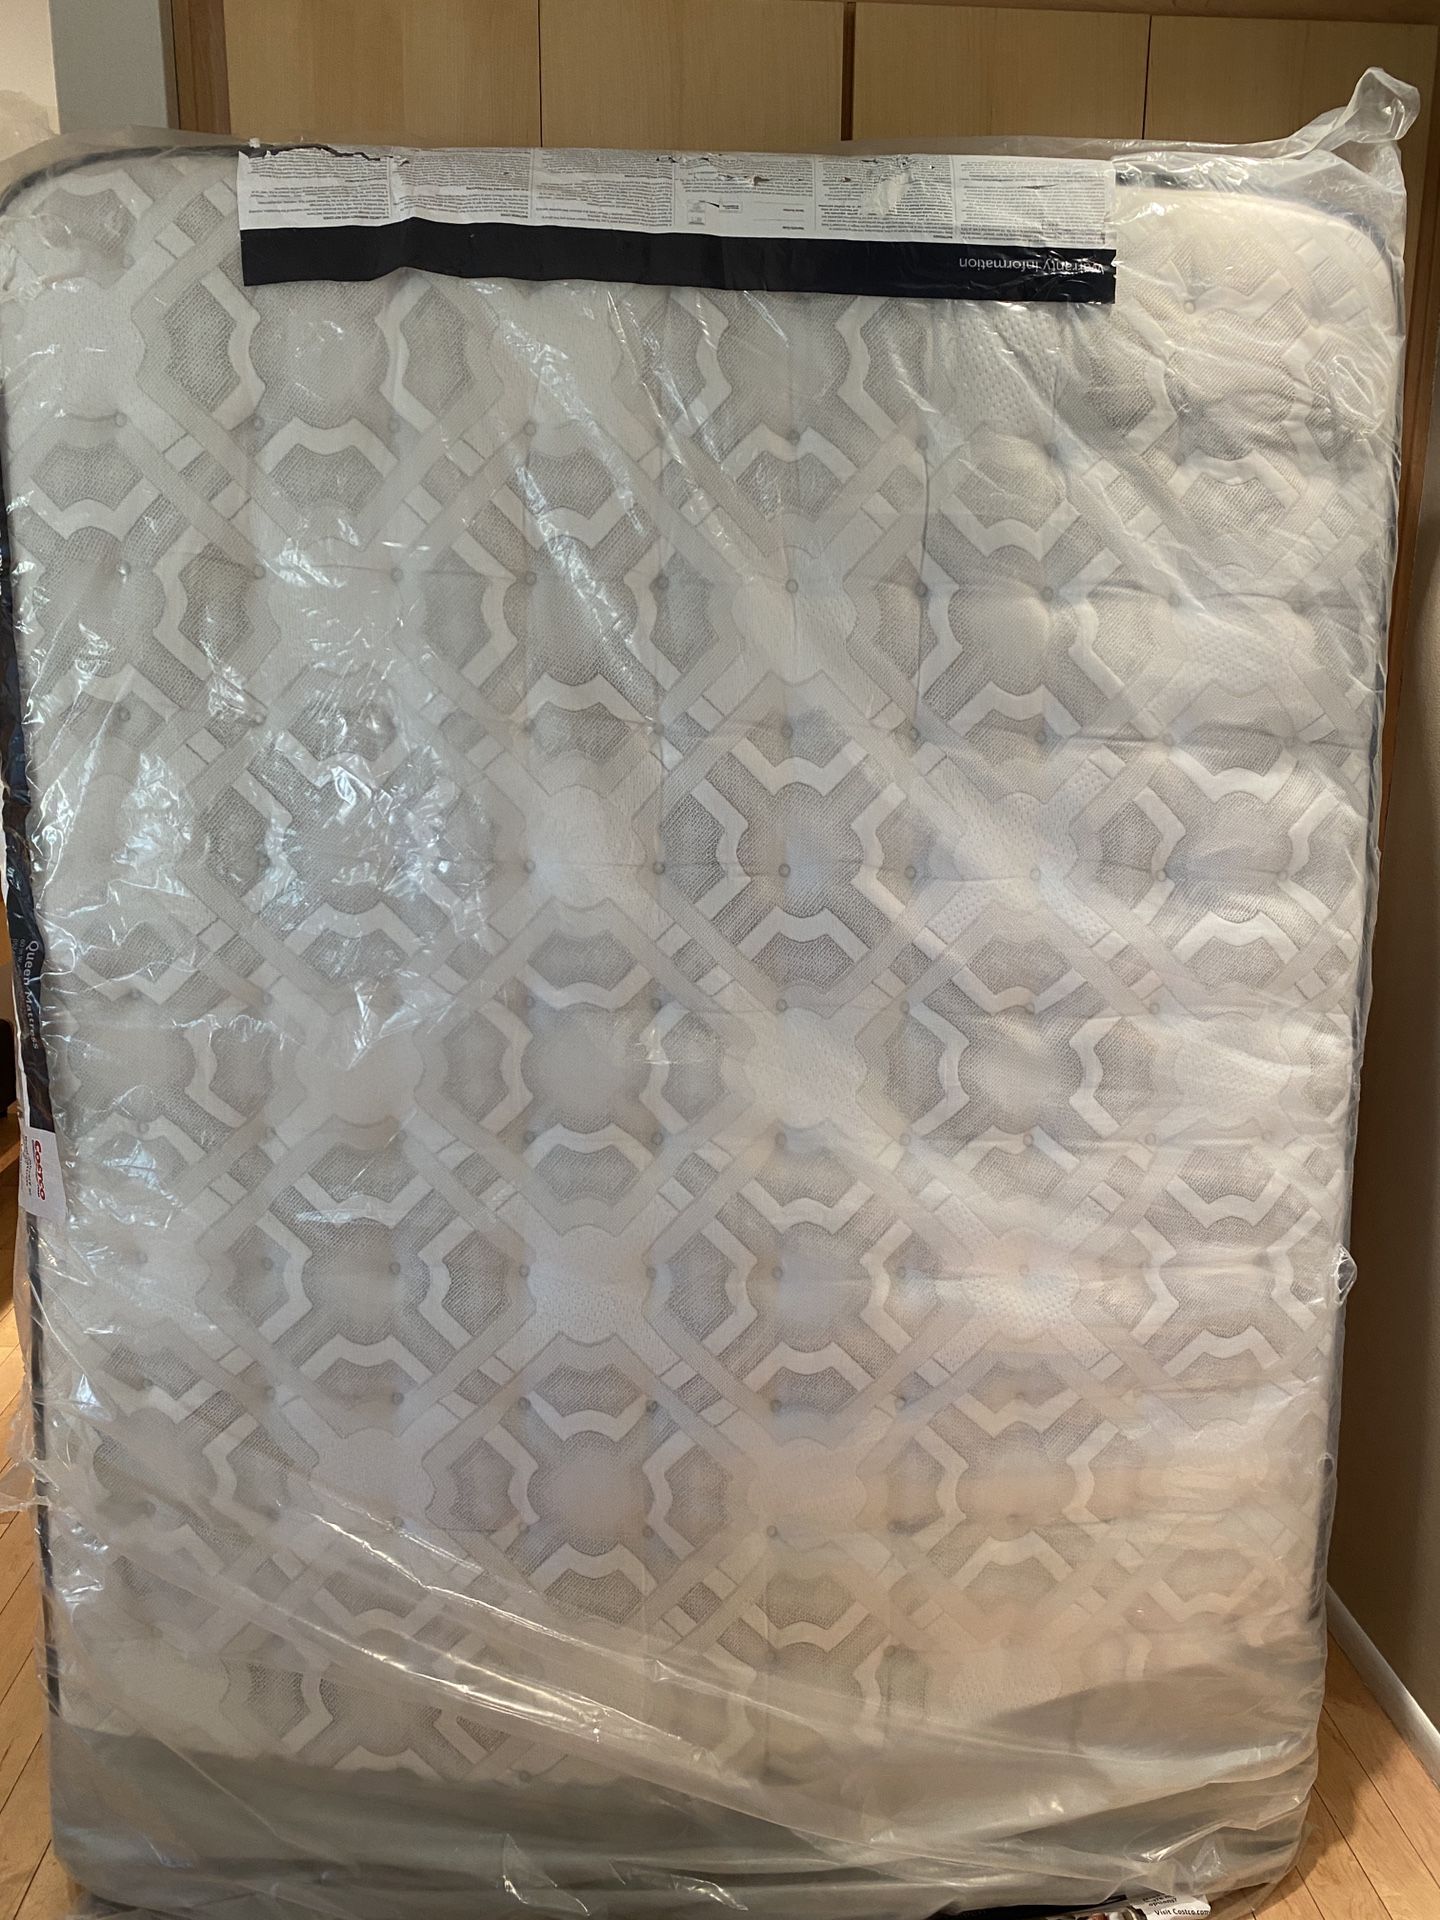 Sealy Mattress Queen Size “West Salem” from Costco